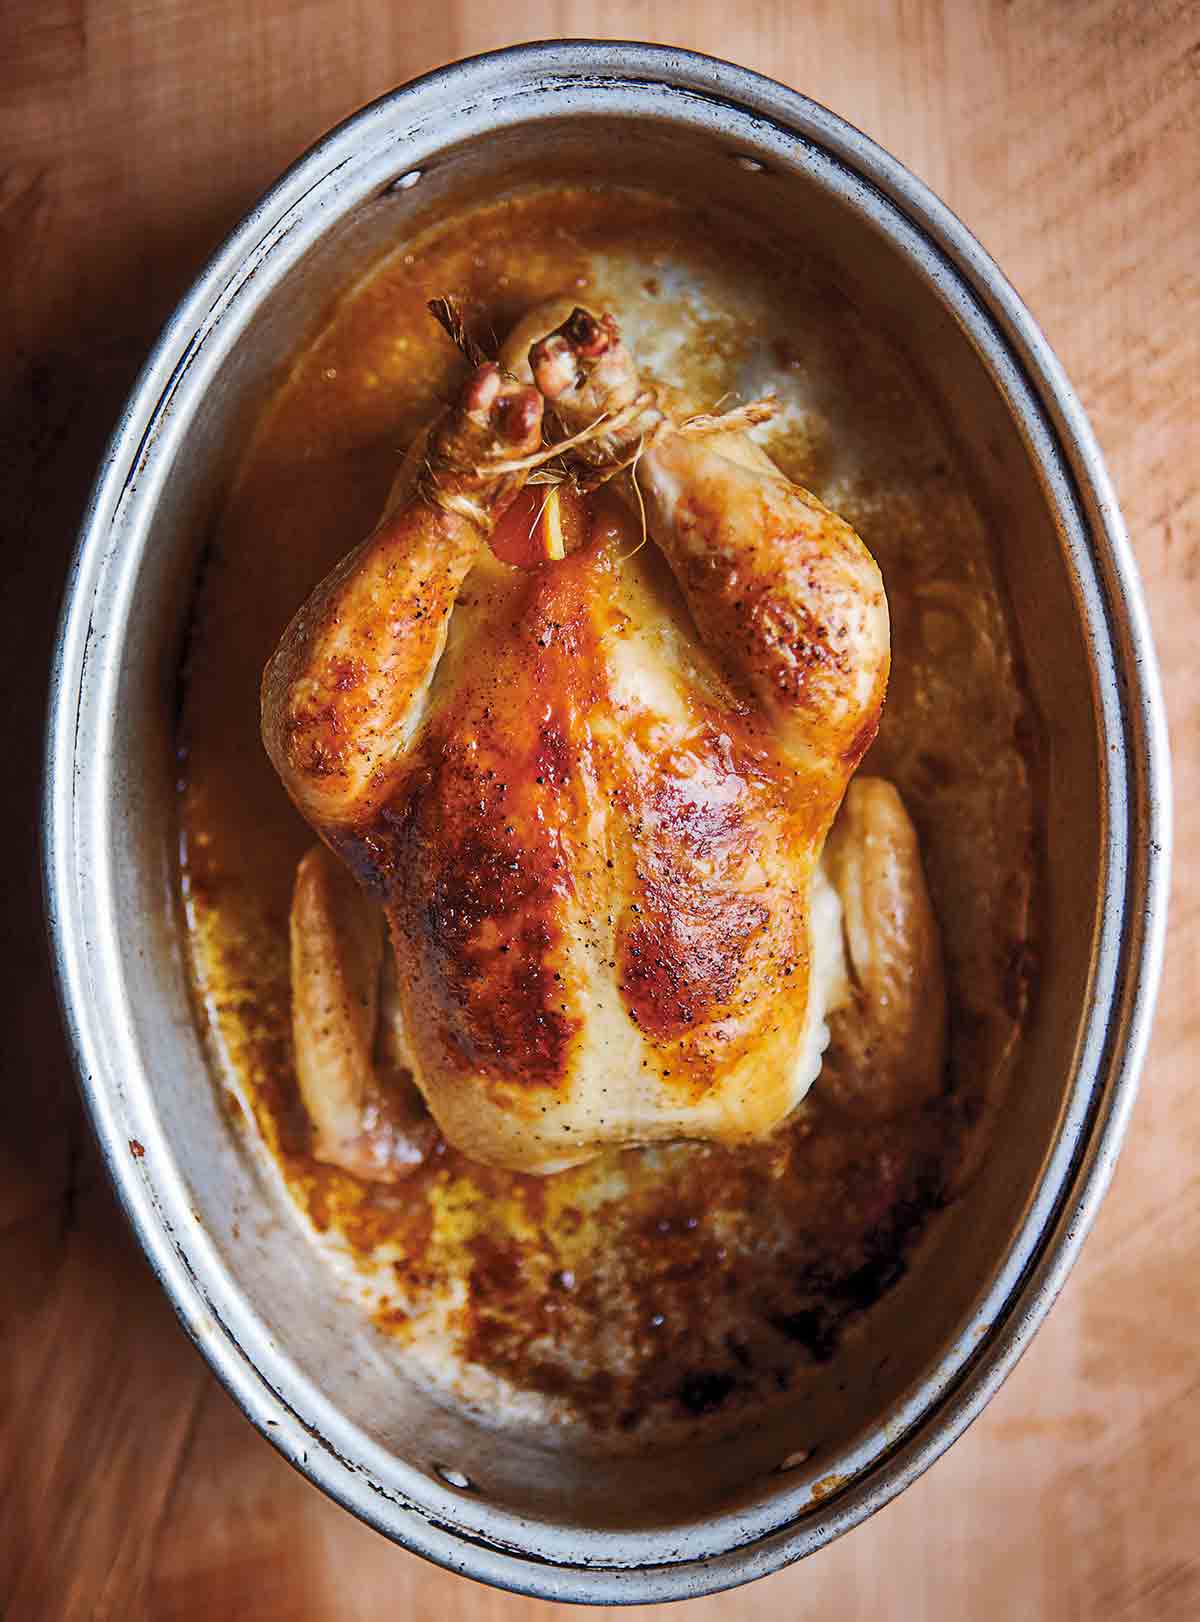 A whole cooked wheat beer roasted chicken in a deep oval baking dish.